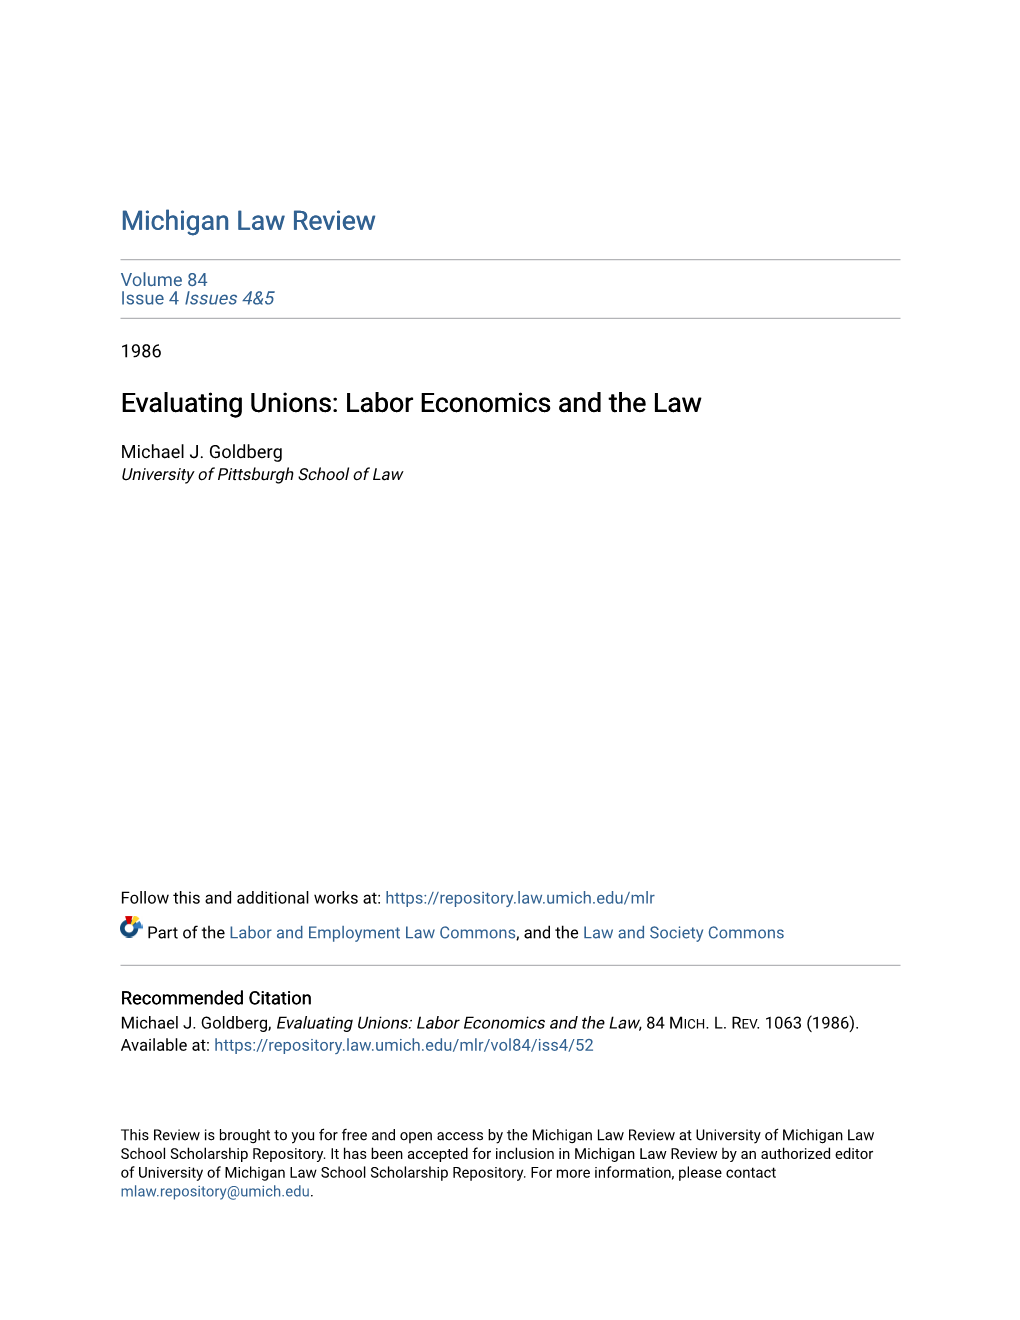 Evaluating Unions: Labor Economics and the Law